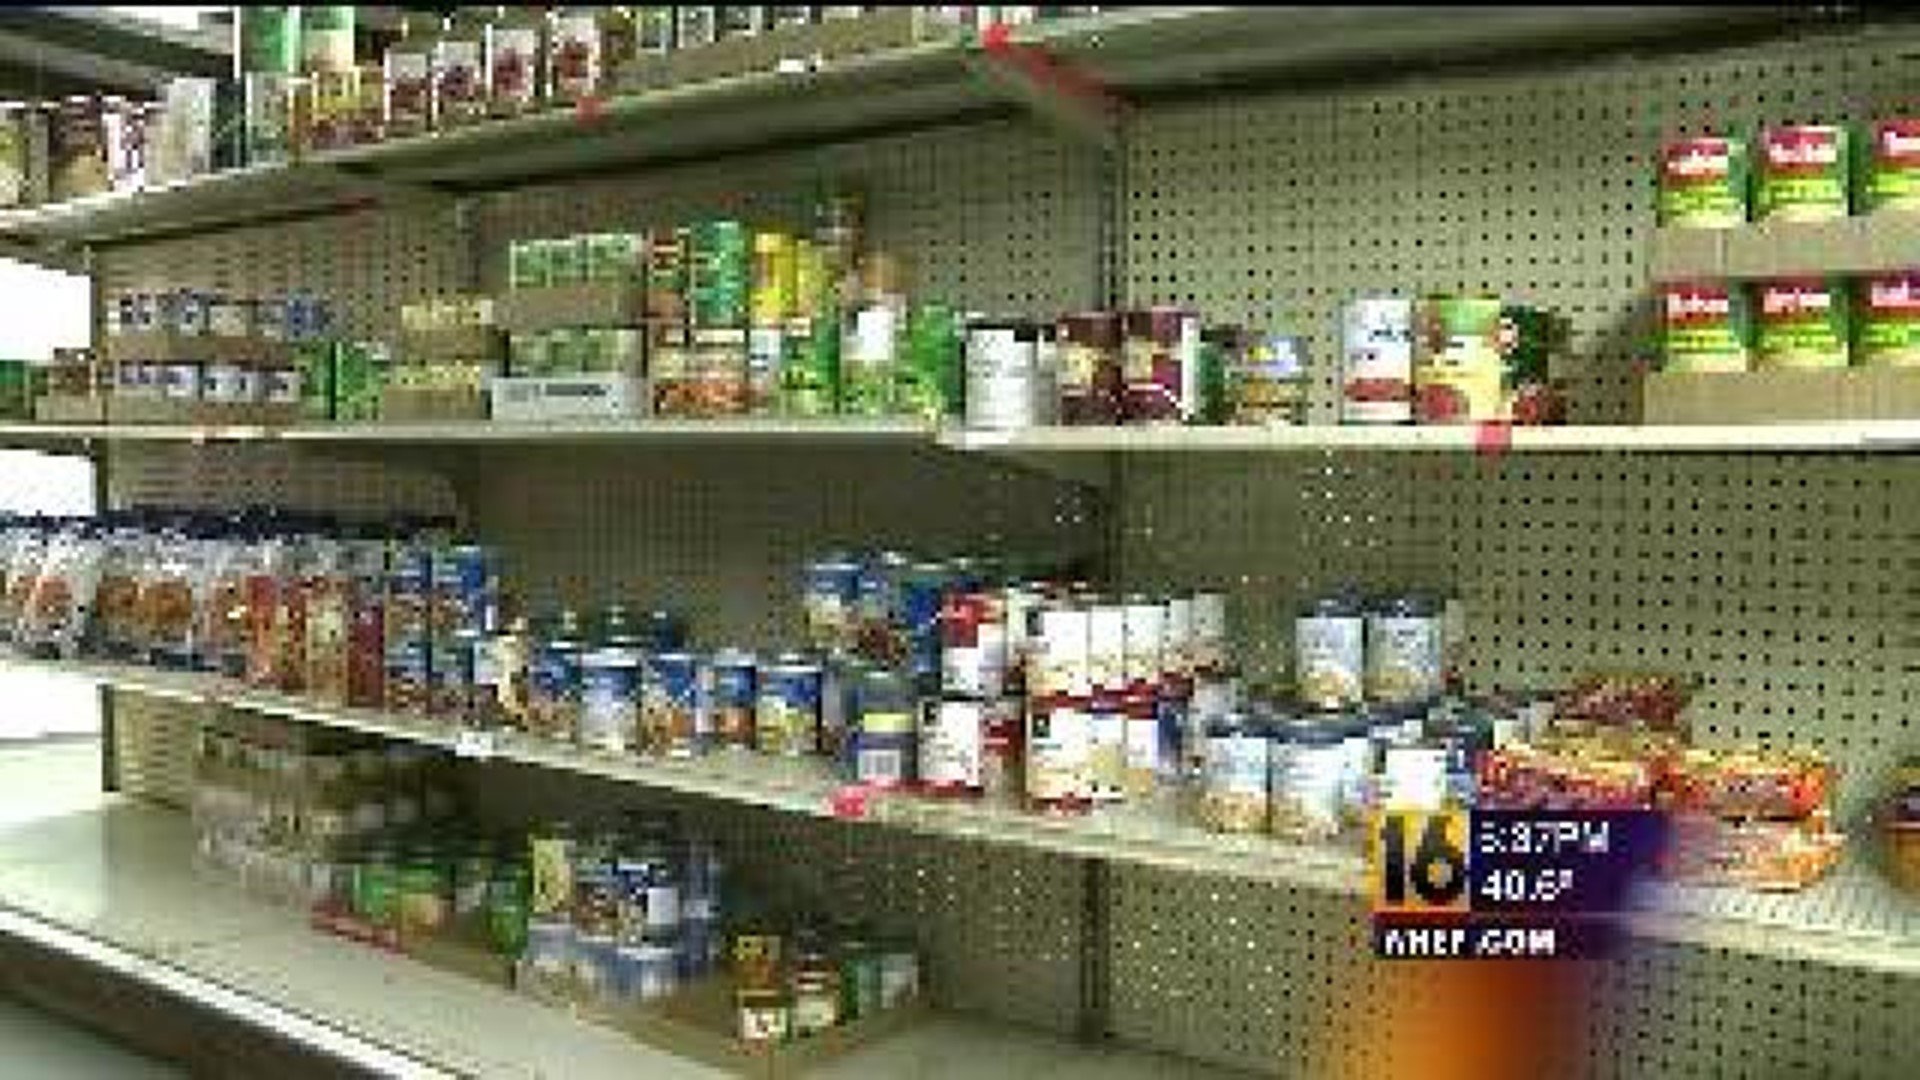 Feed a Friend Program Helps People in Snyder County